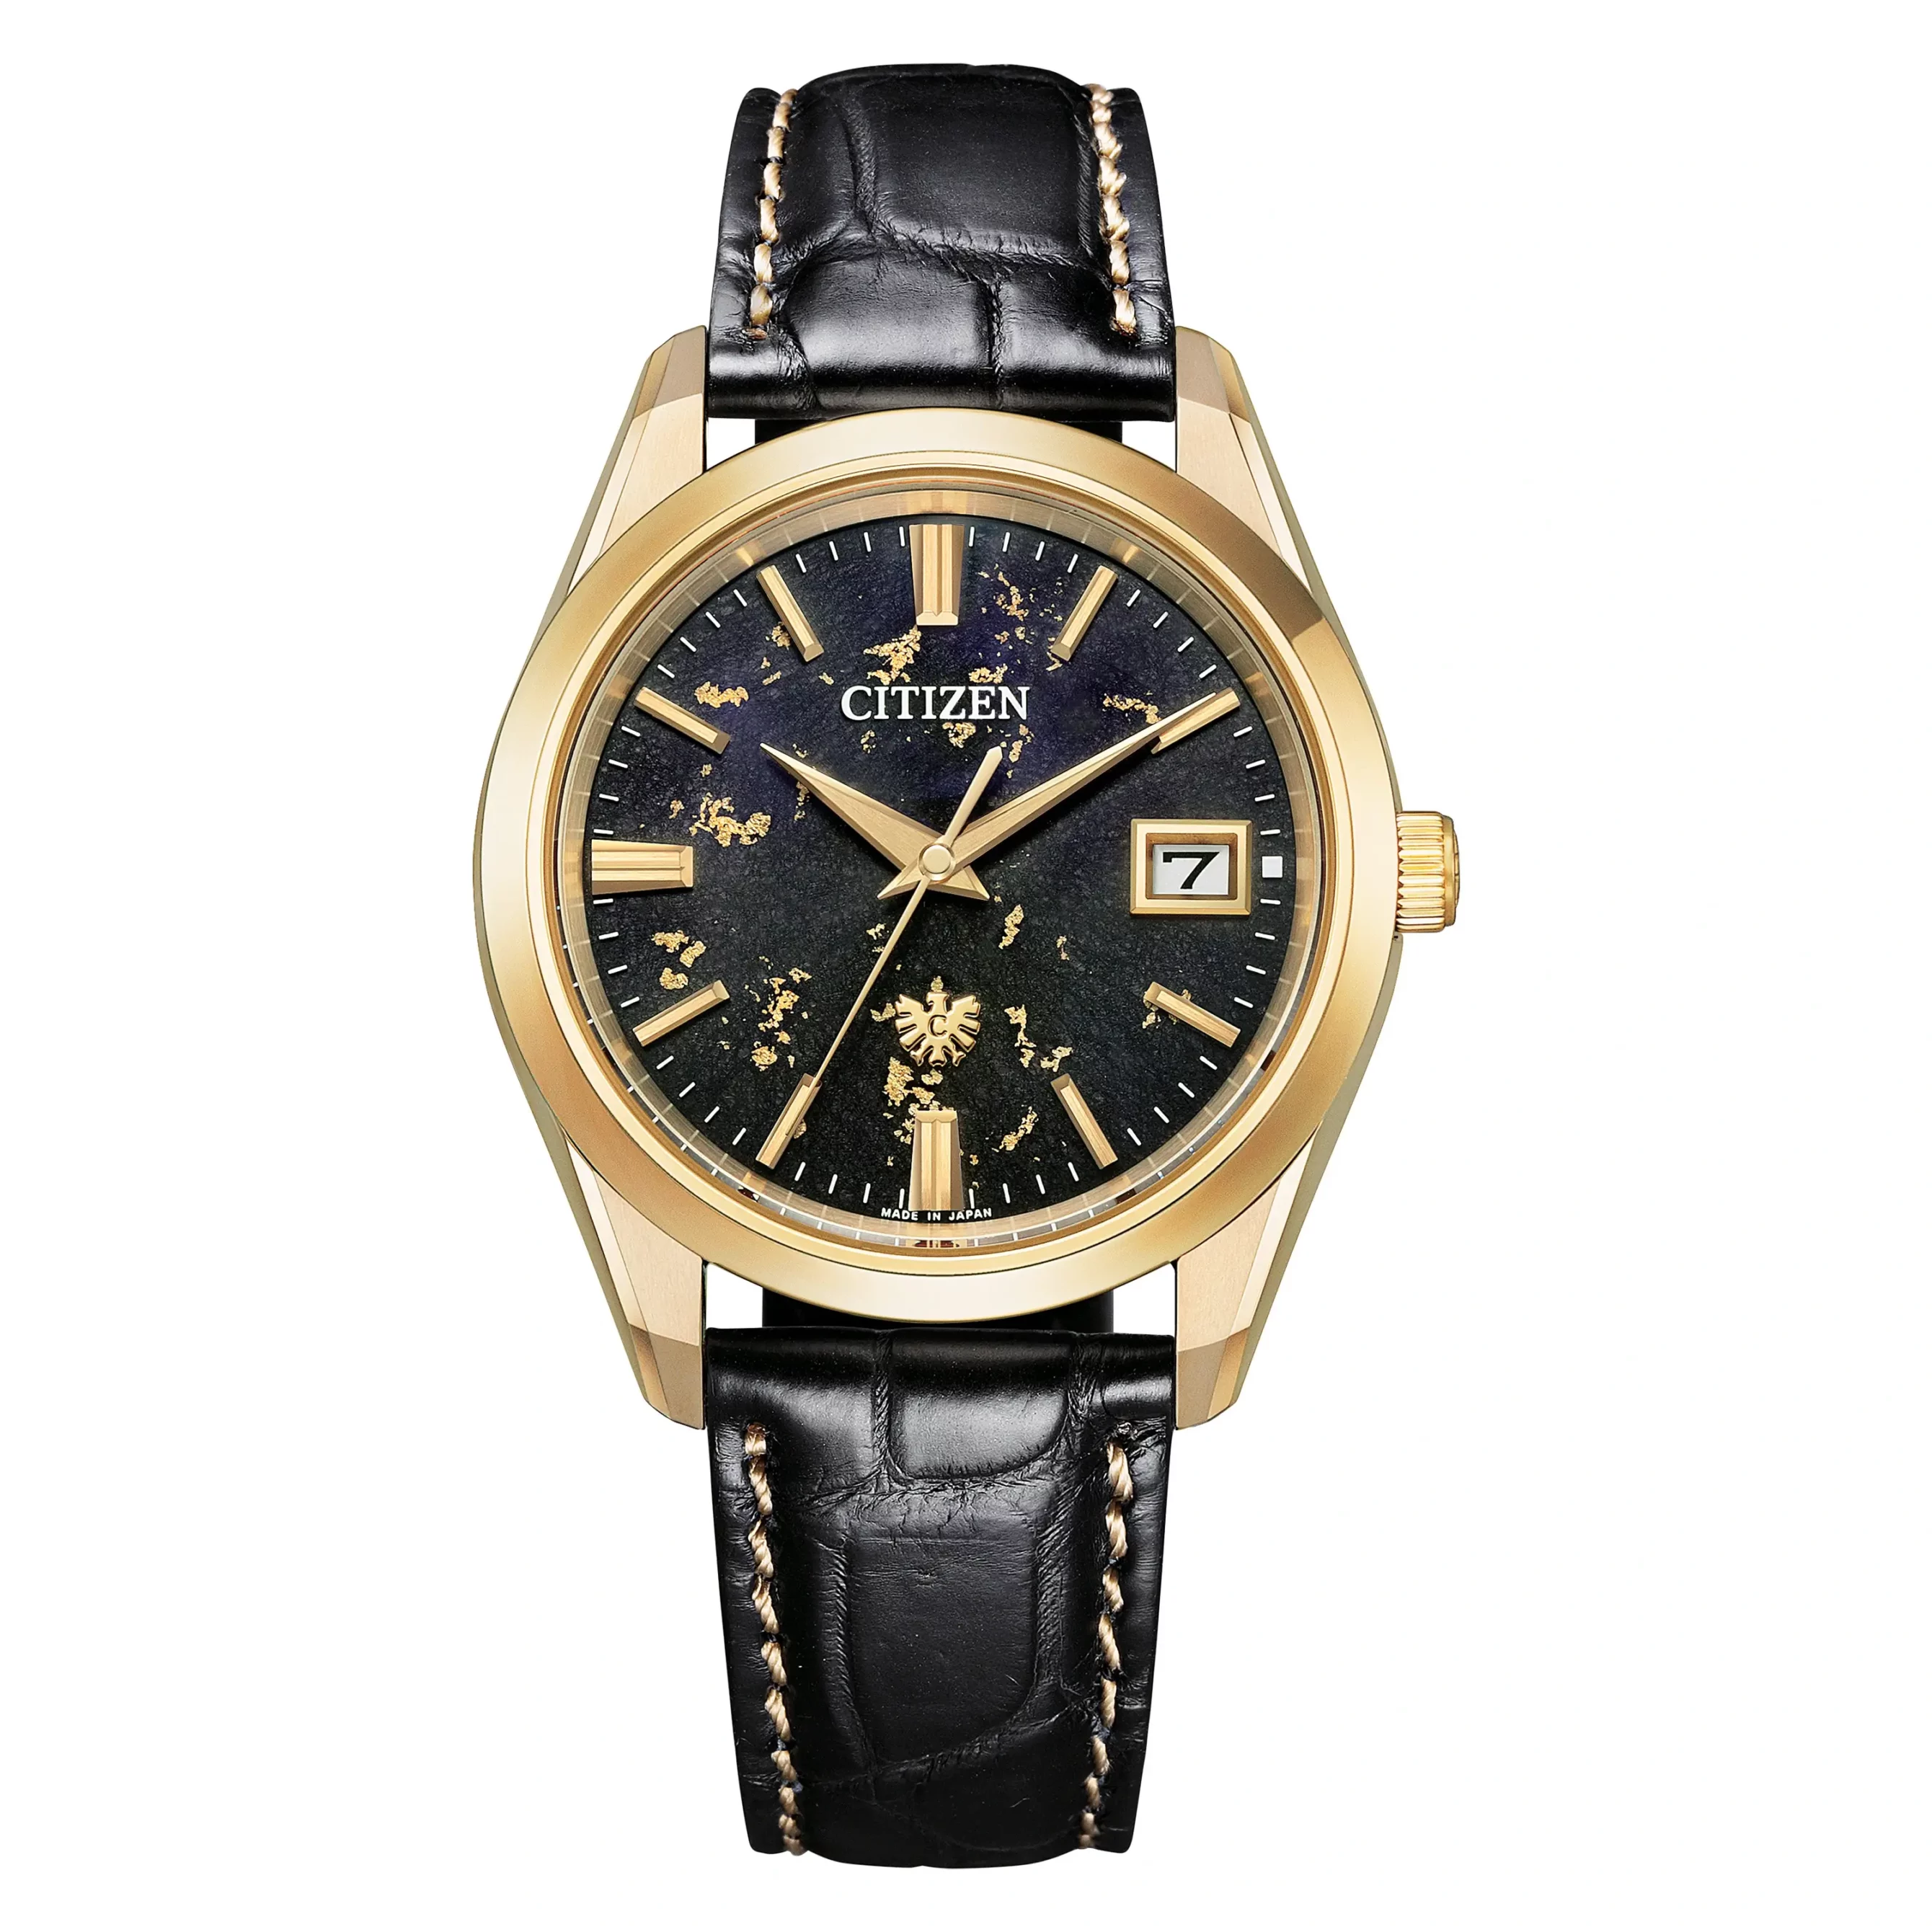 New releases from HYT, Citizen, Bulgari and more